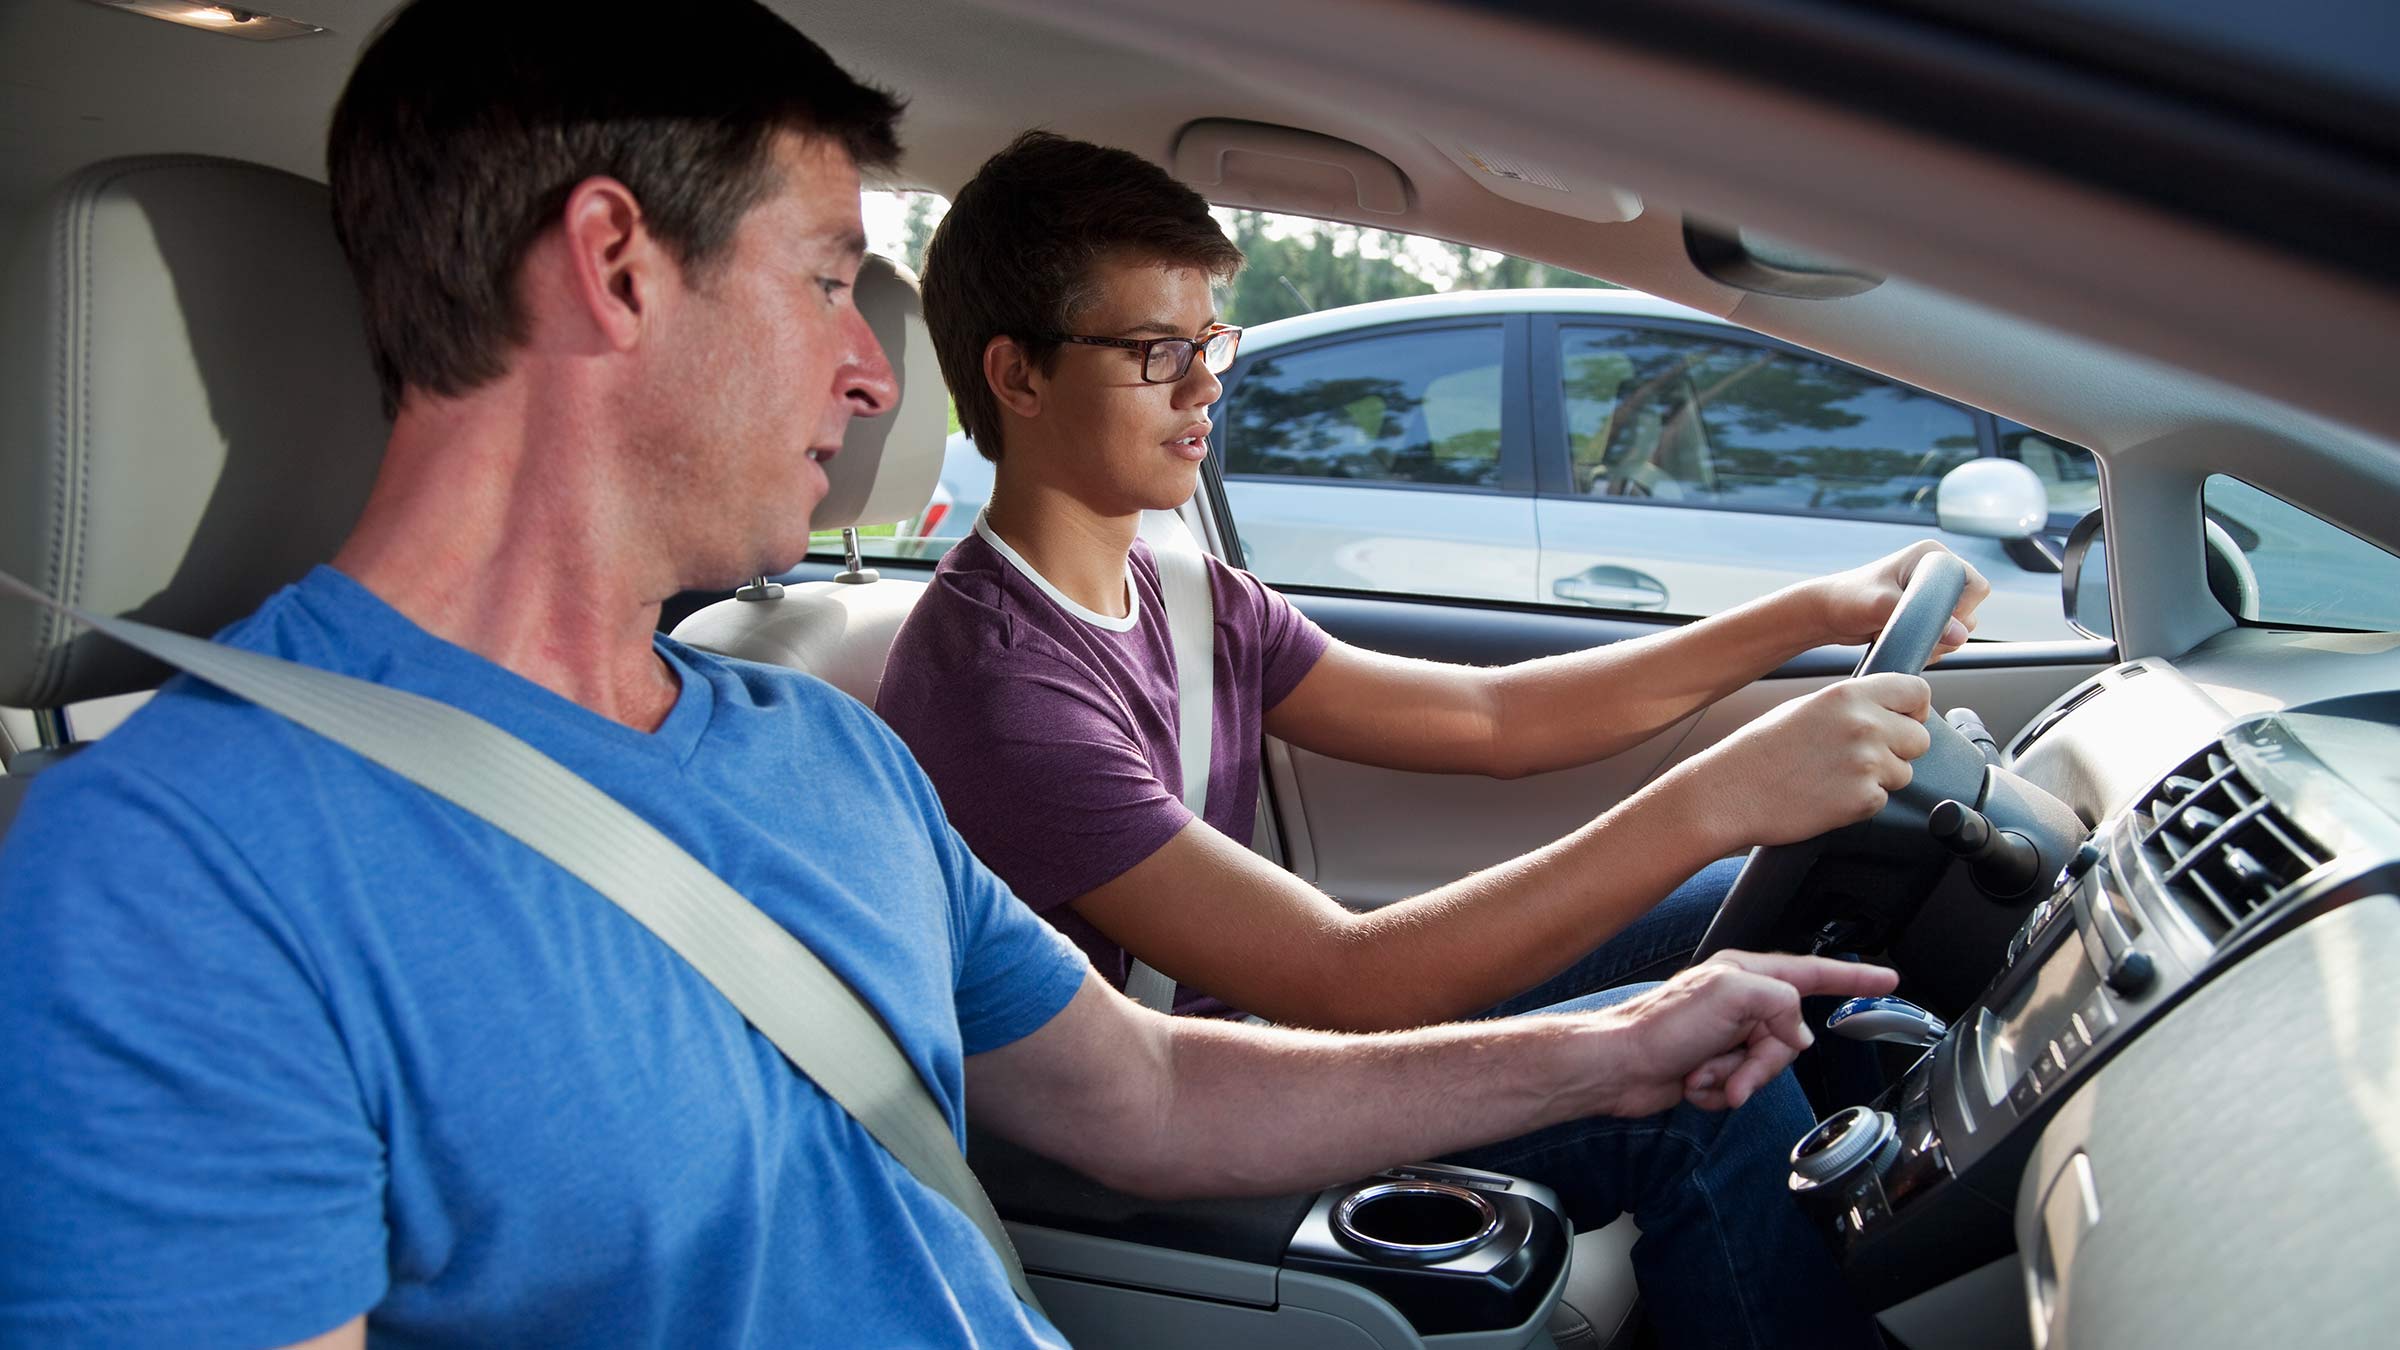 A teen wearing glasses grips a steering wheel sitting in a car’s driver’s seat, while an instructor points from the passenger seat